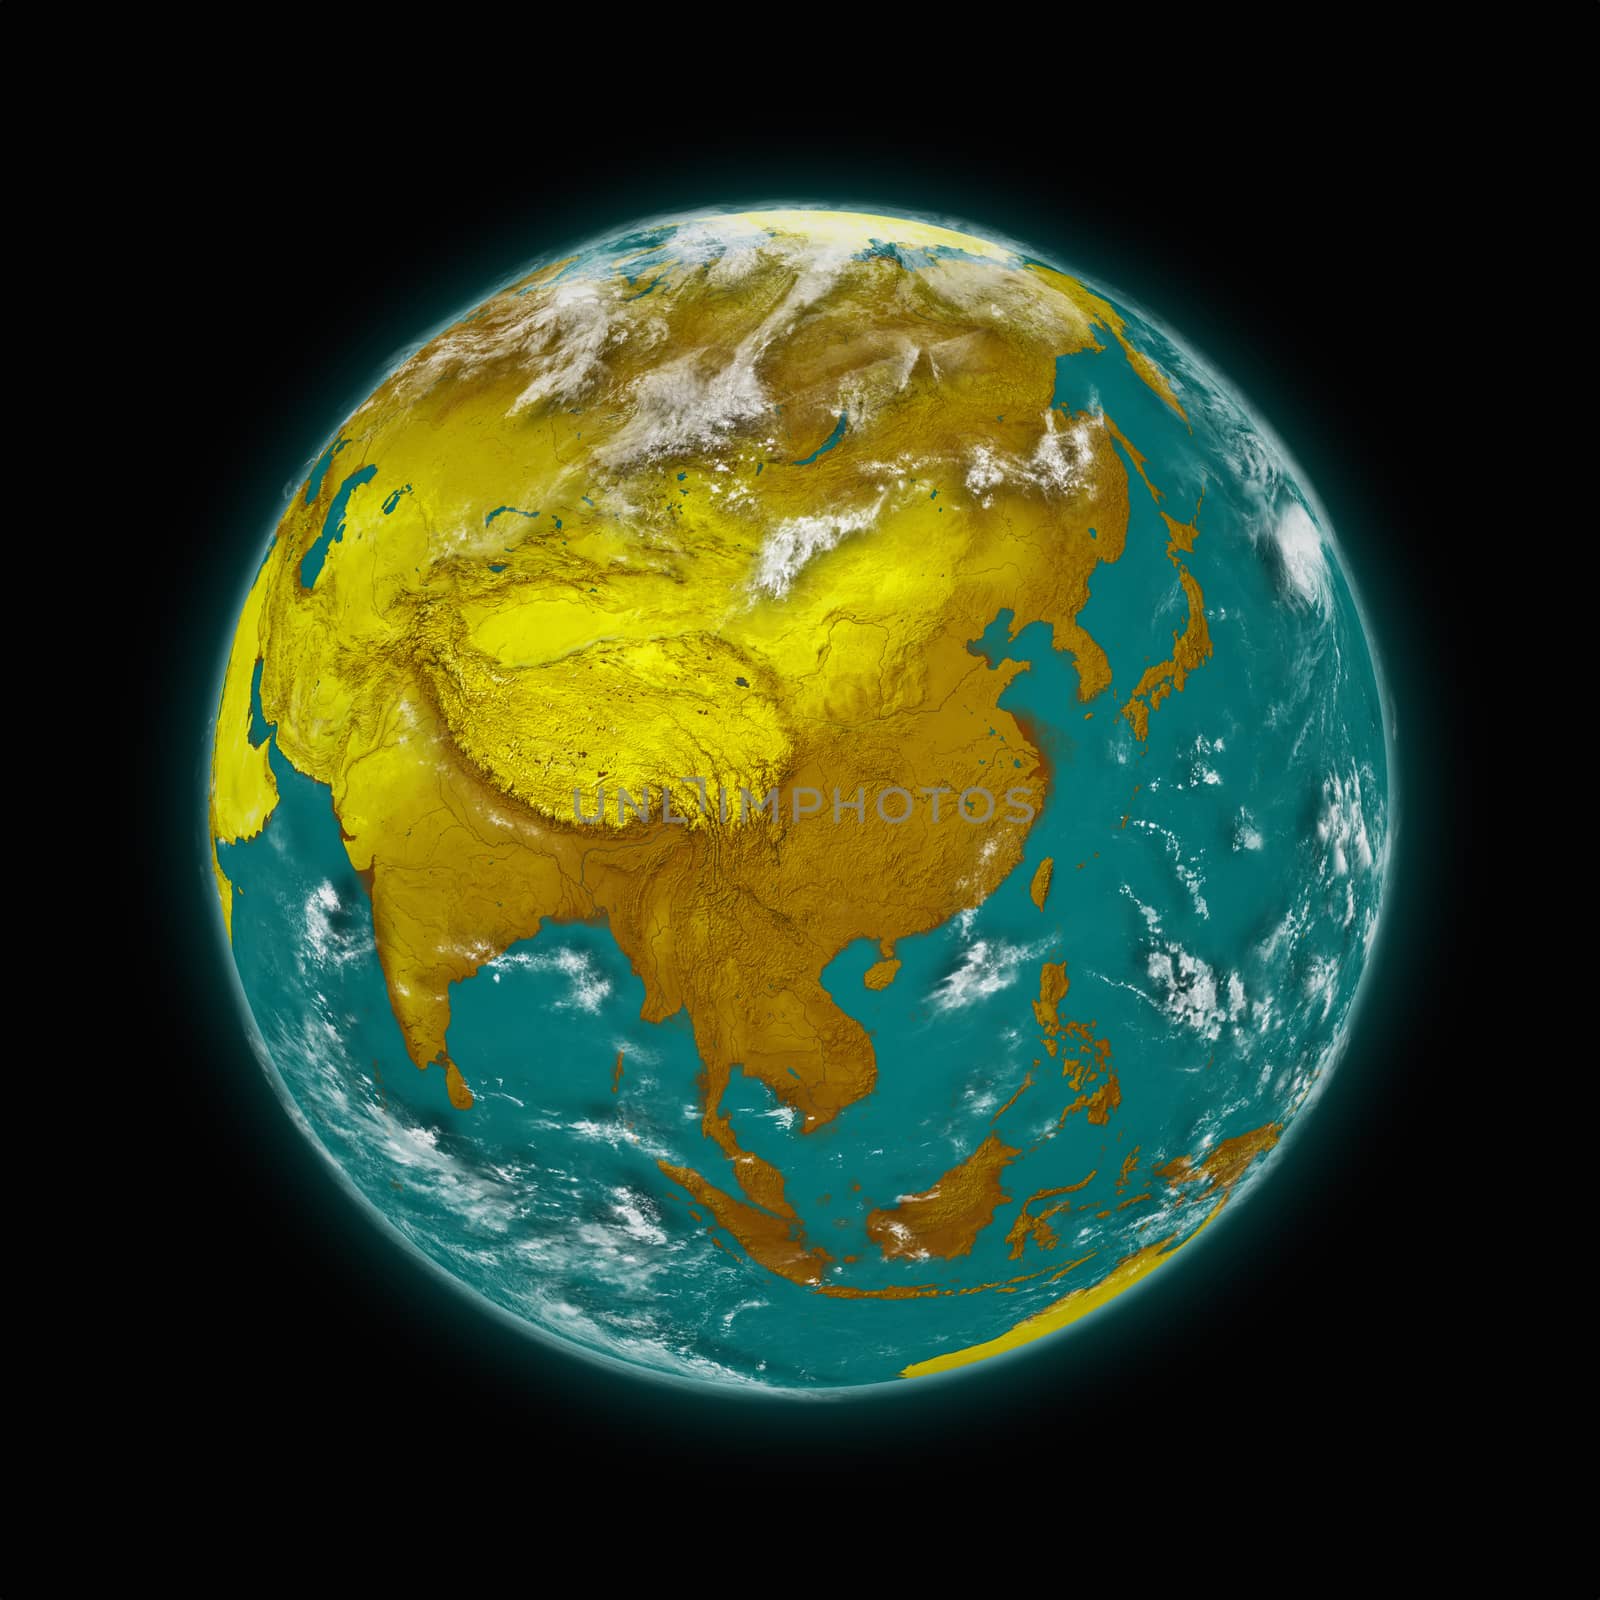 Southeast Asia on blue planet Earth isolated on black background. Highly detailed planet surface. Elements of this image furnished by NASA.